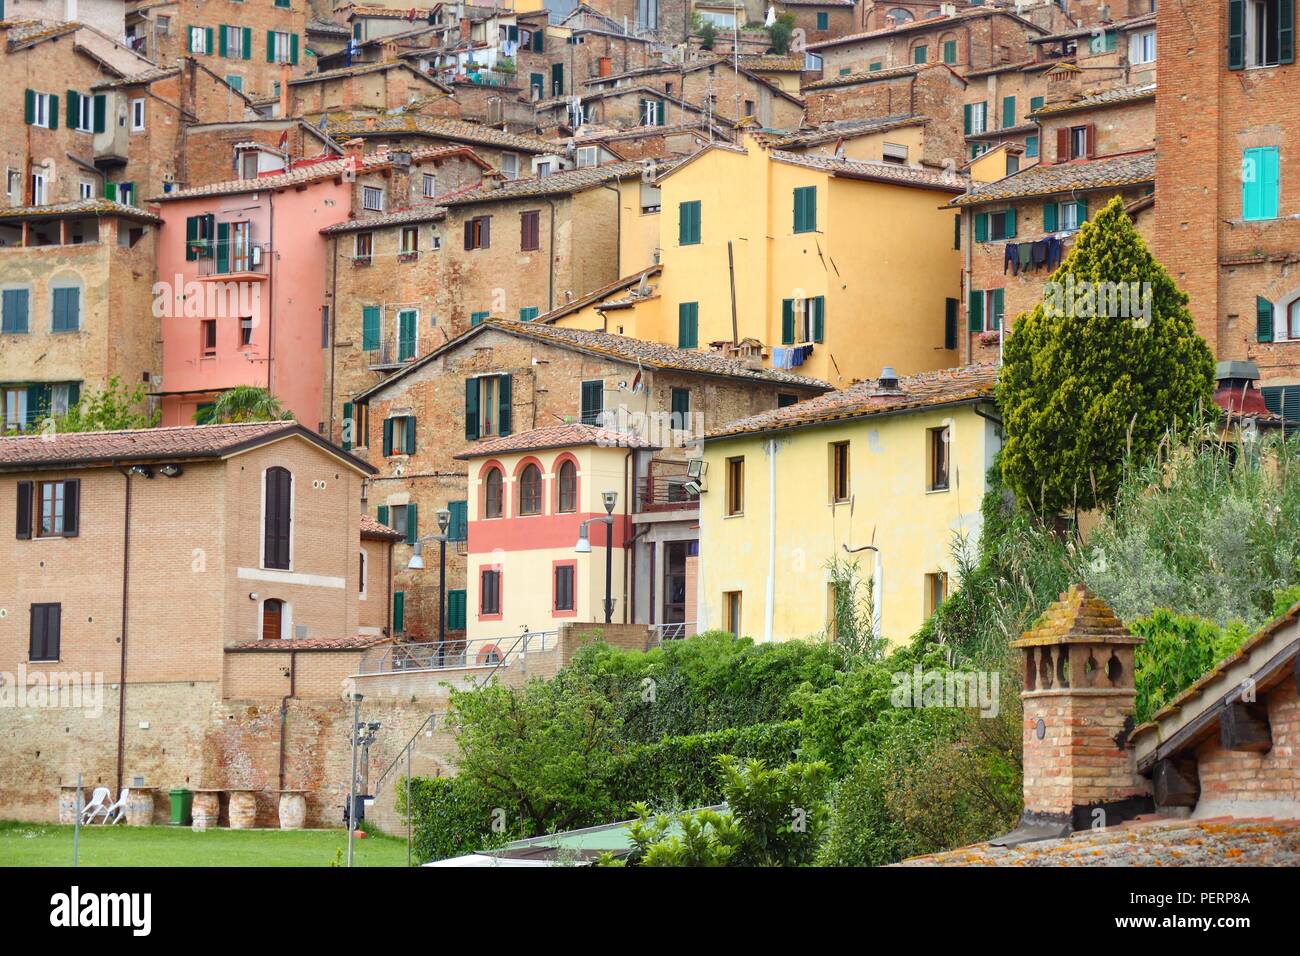 Siena, Italy - medieval town of Tuscany. Old town architecture. Stock Photo